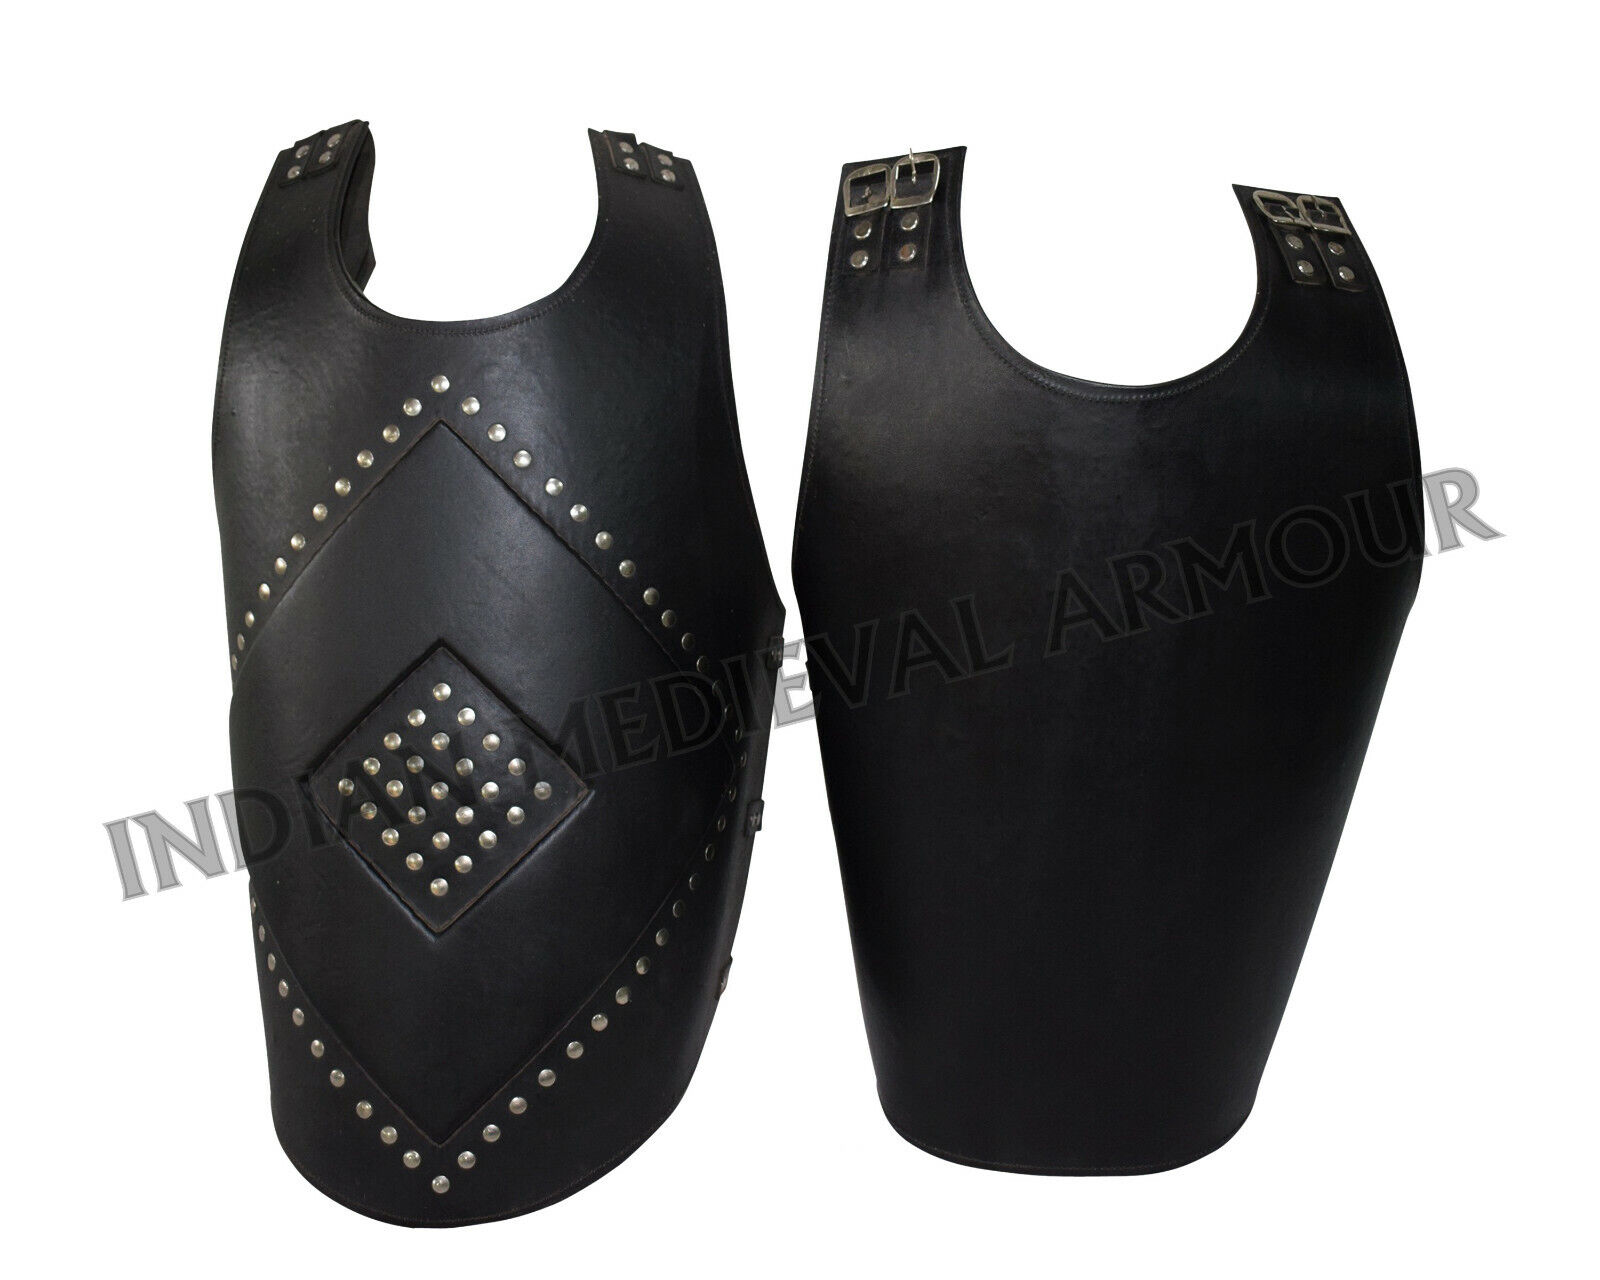 Real Black Genuine Leather Body Armor For Warrior Cosplay LARP